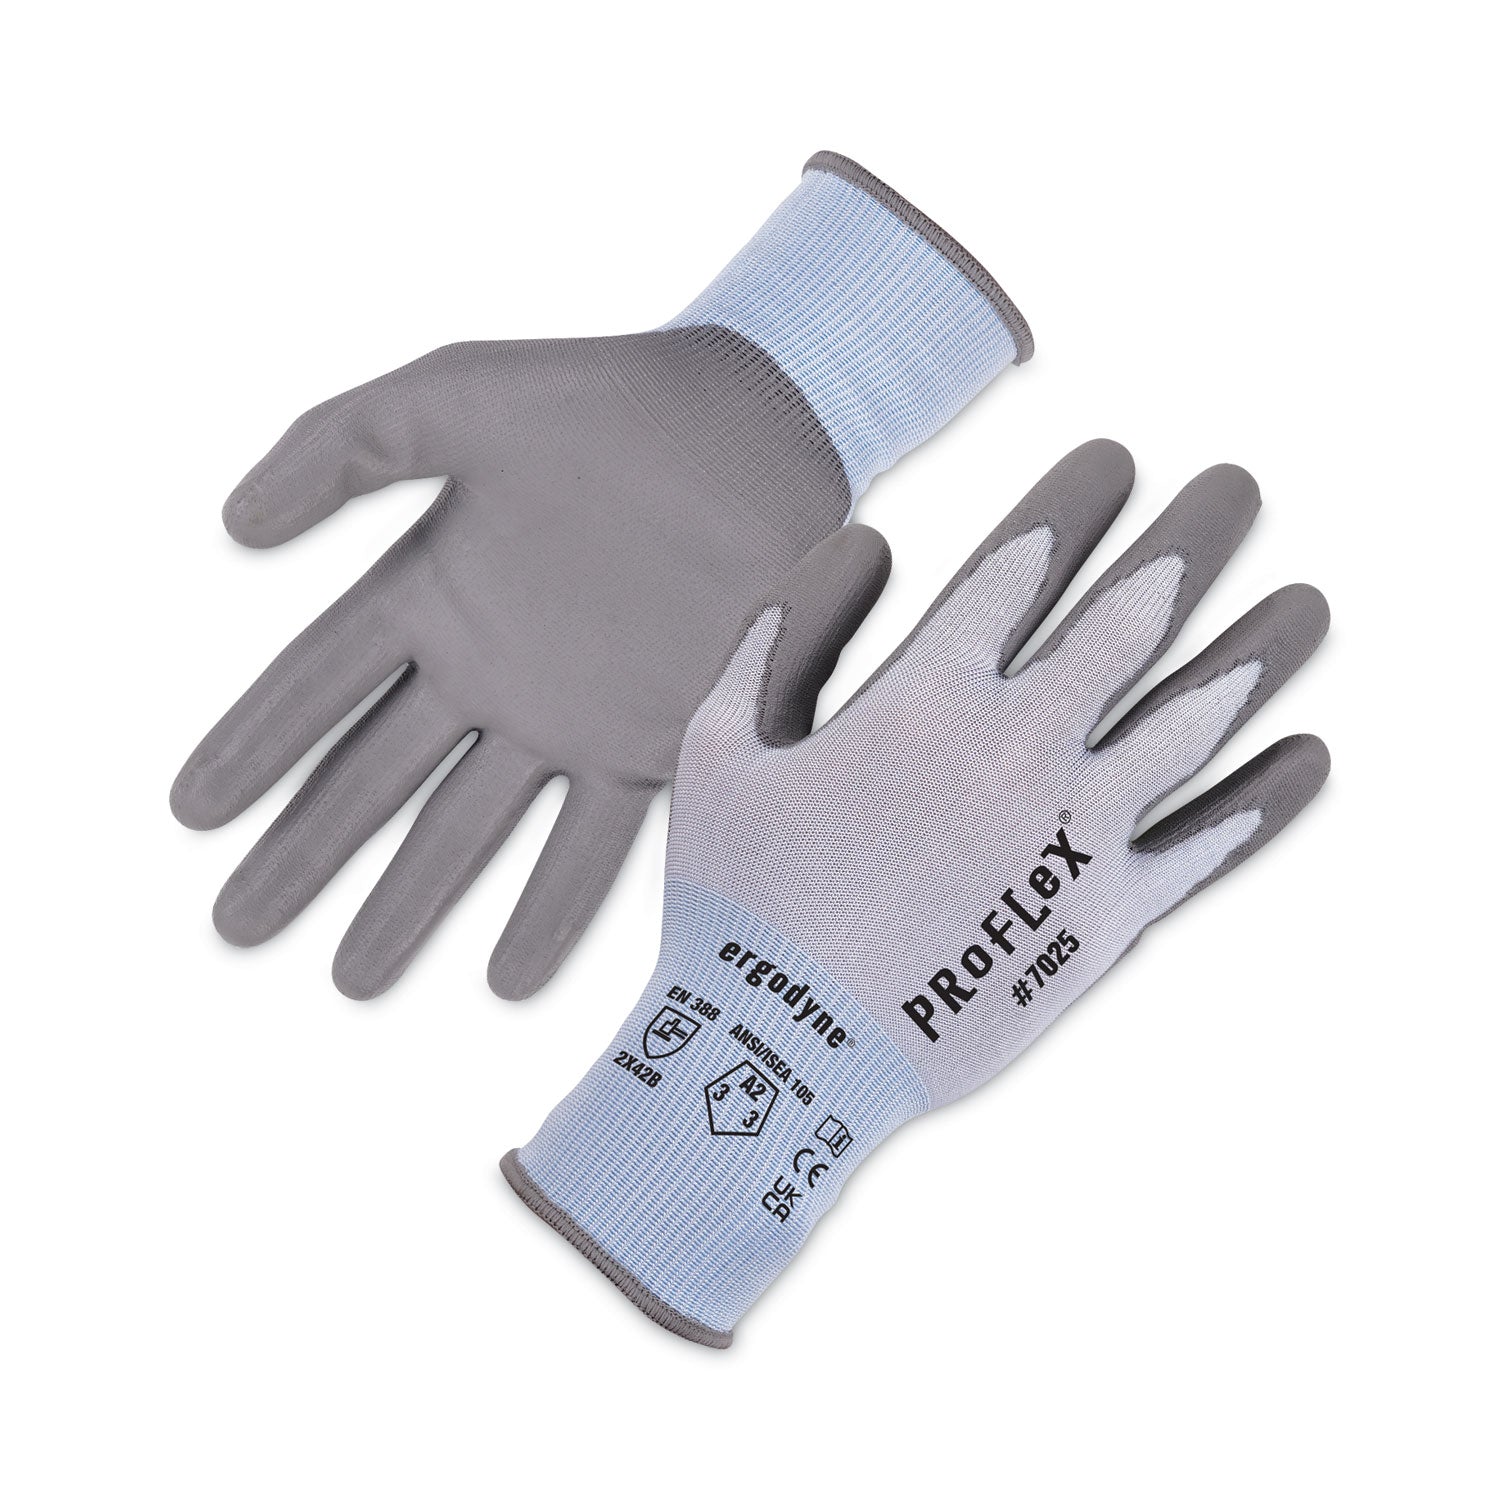 proflex-7025-ansi-a2-pu-coated-cr-gloves-blue-2x-large-pair-ships-in-1-3-business-days_ego10436 - 1